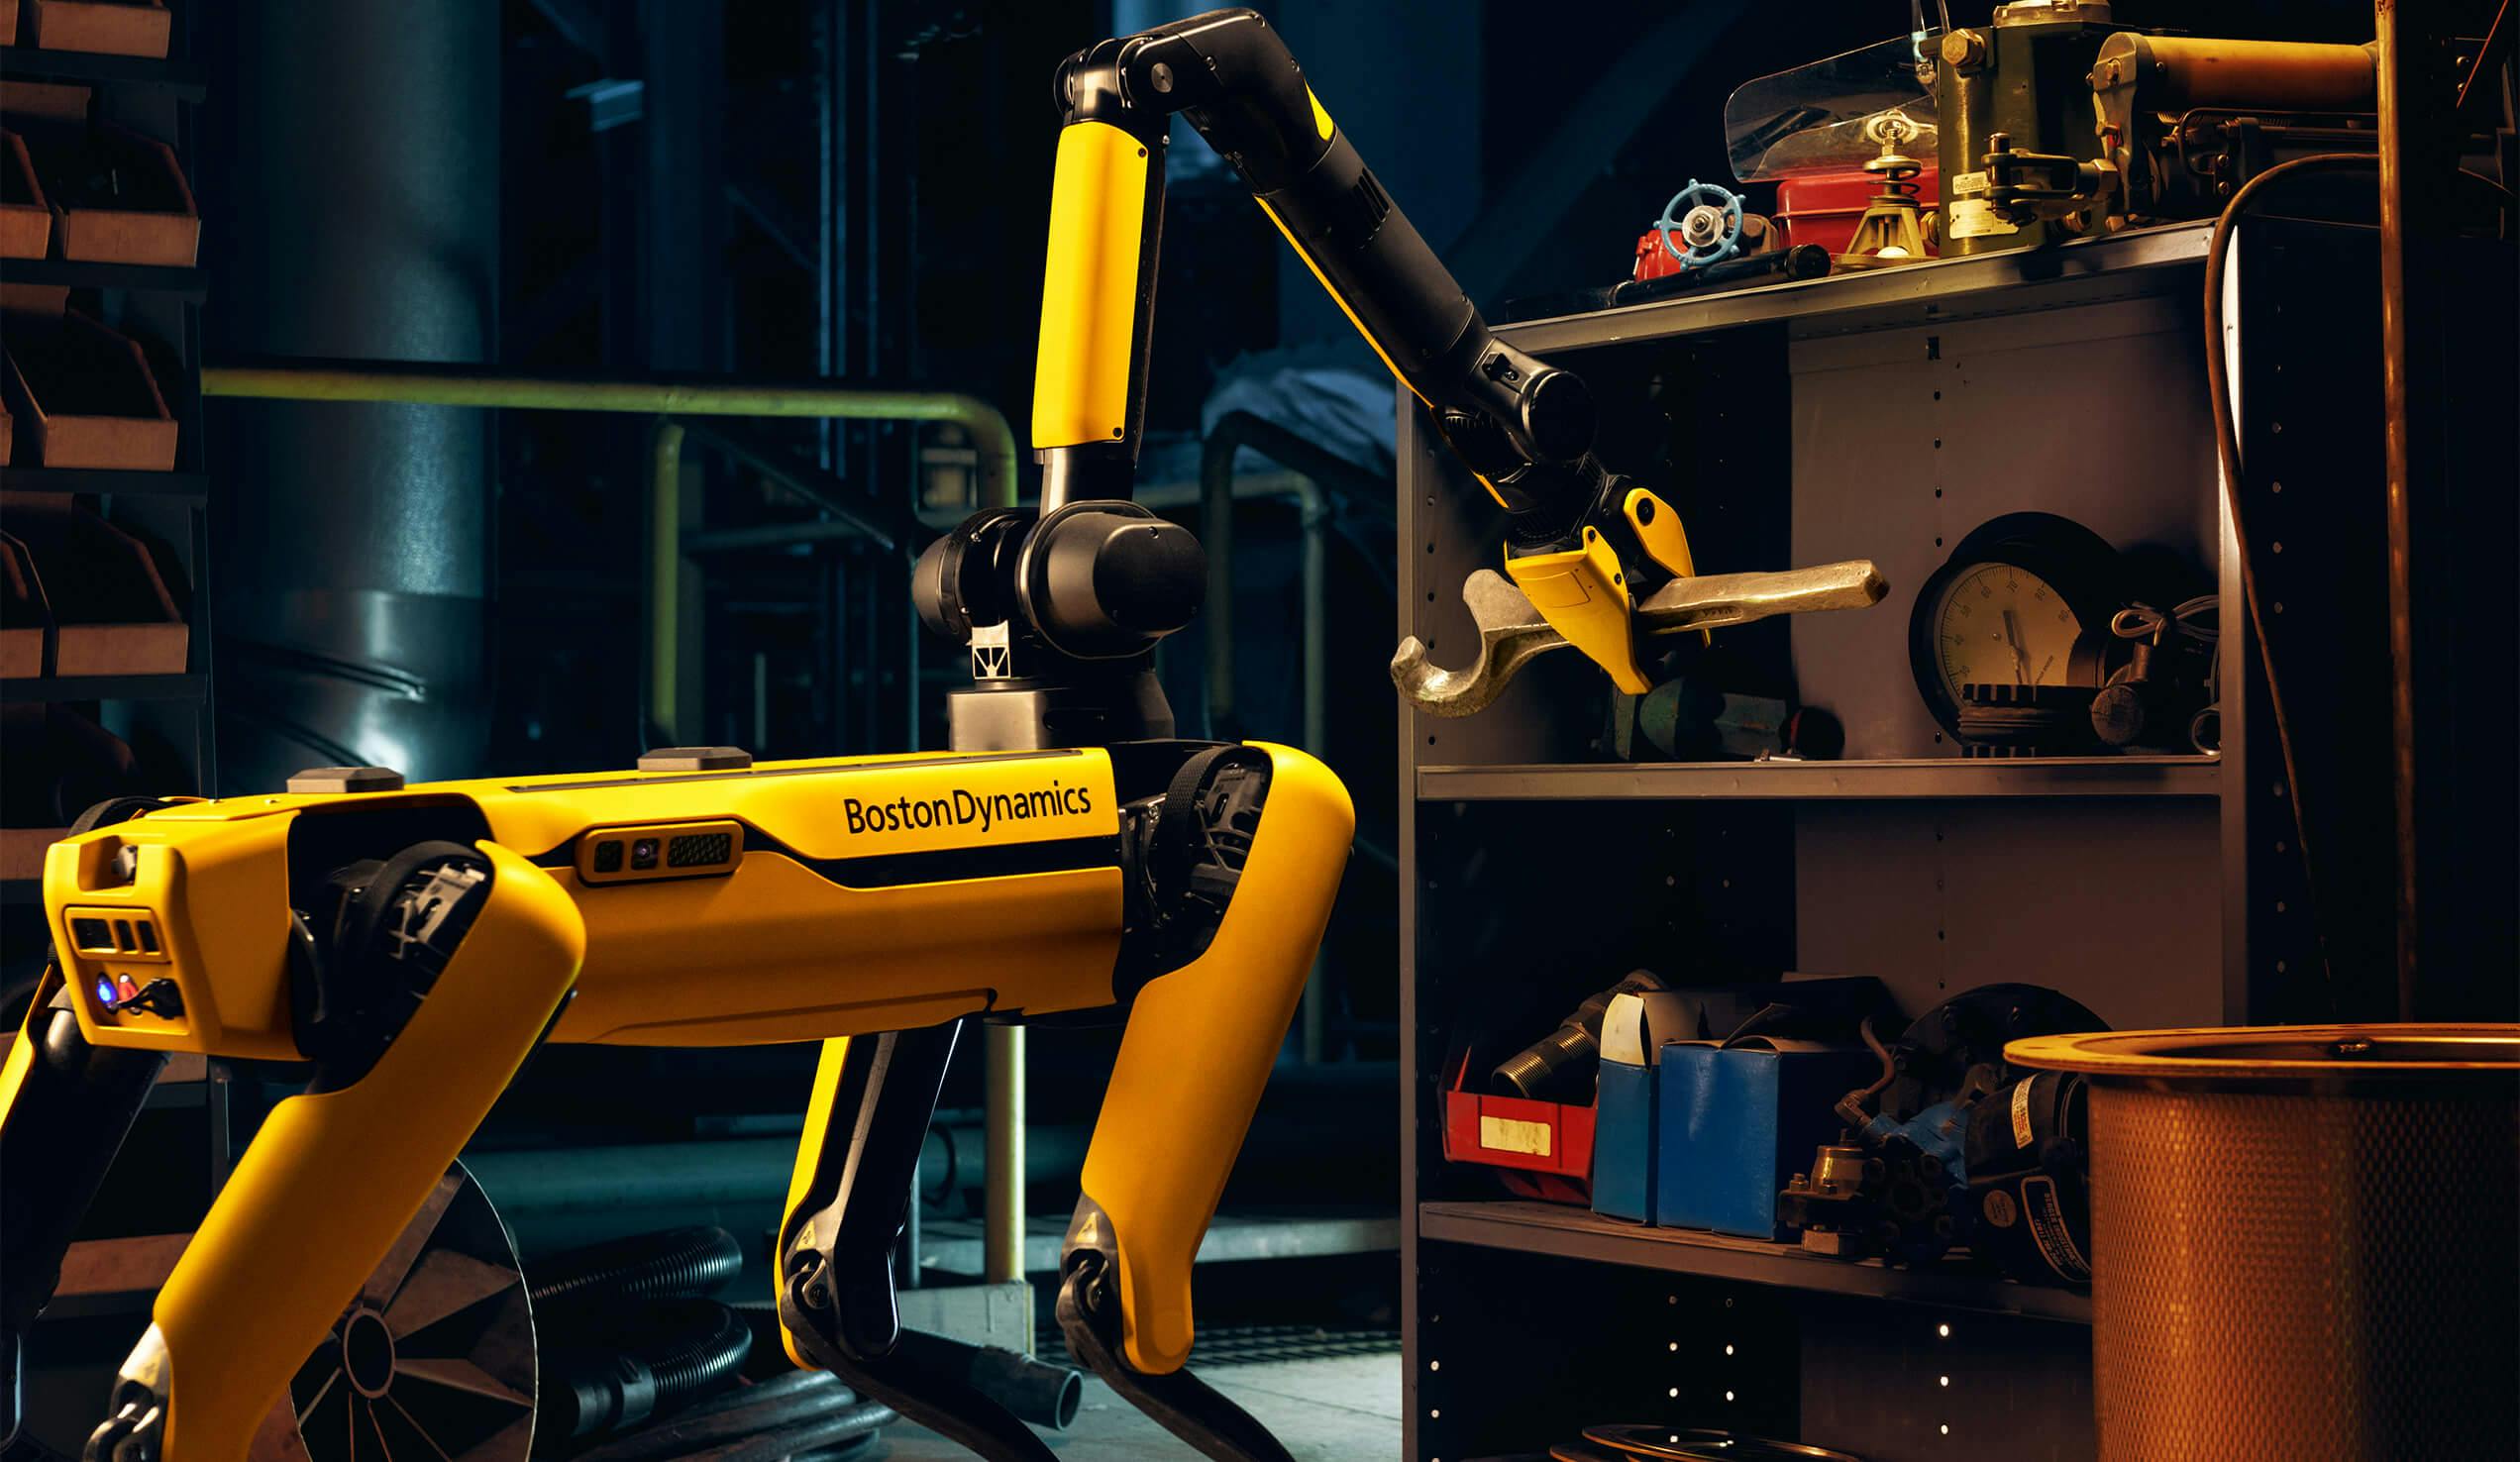 Rightpoint Helps Boston Dynamics Create Bespoke Experiences to Ready Spot for Market - Image